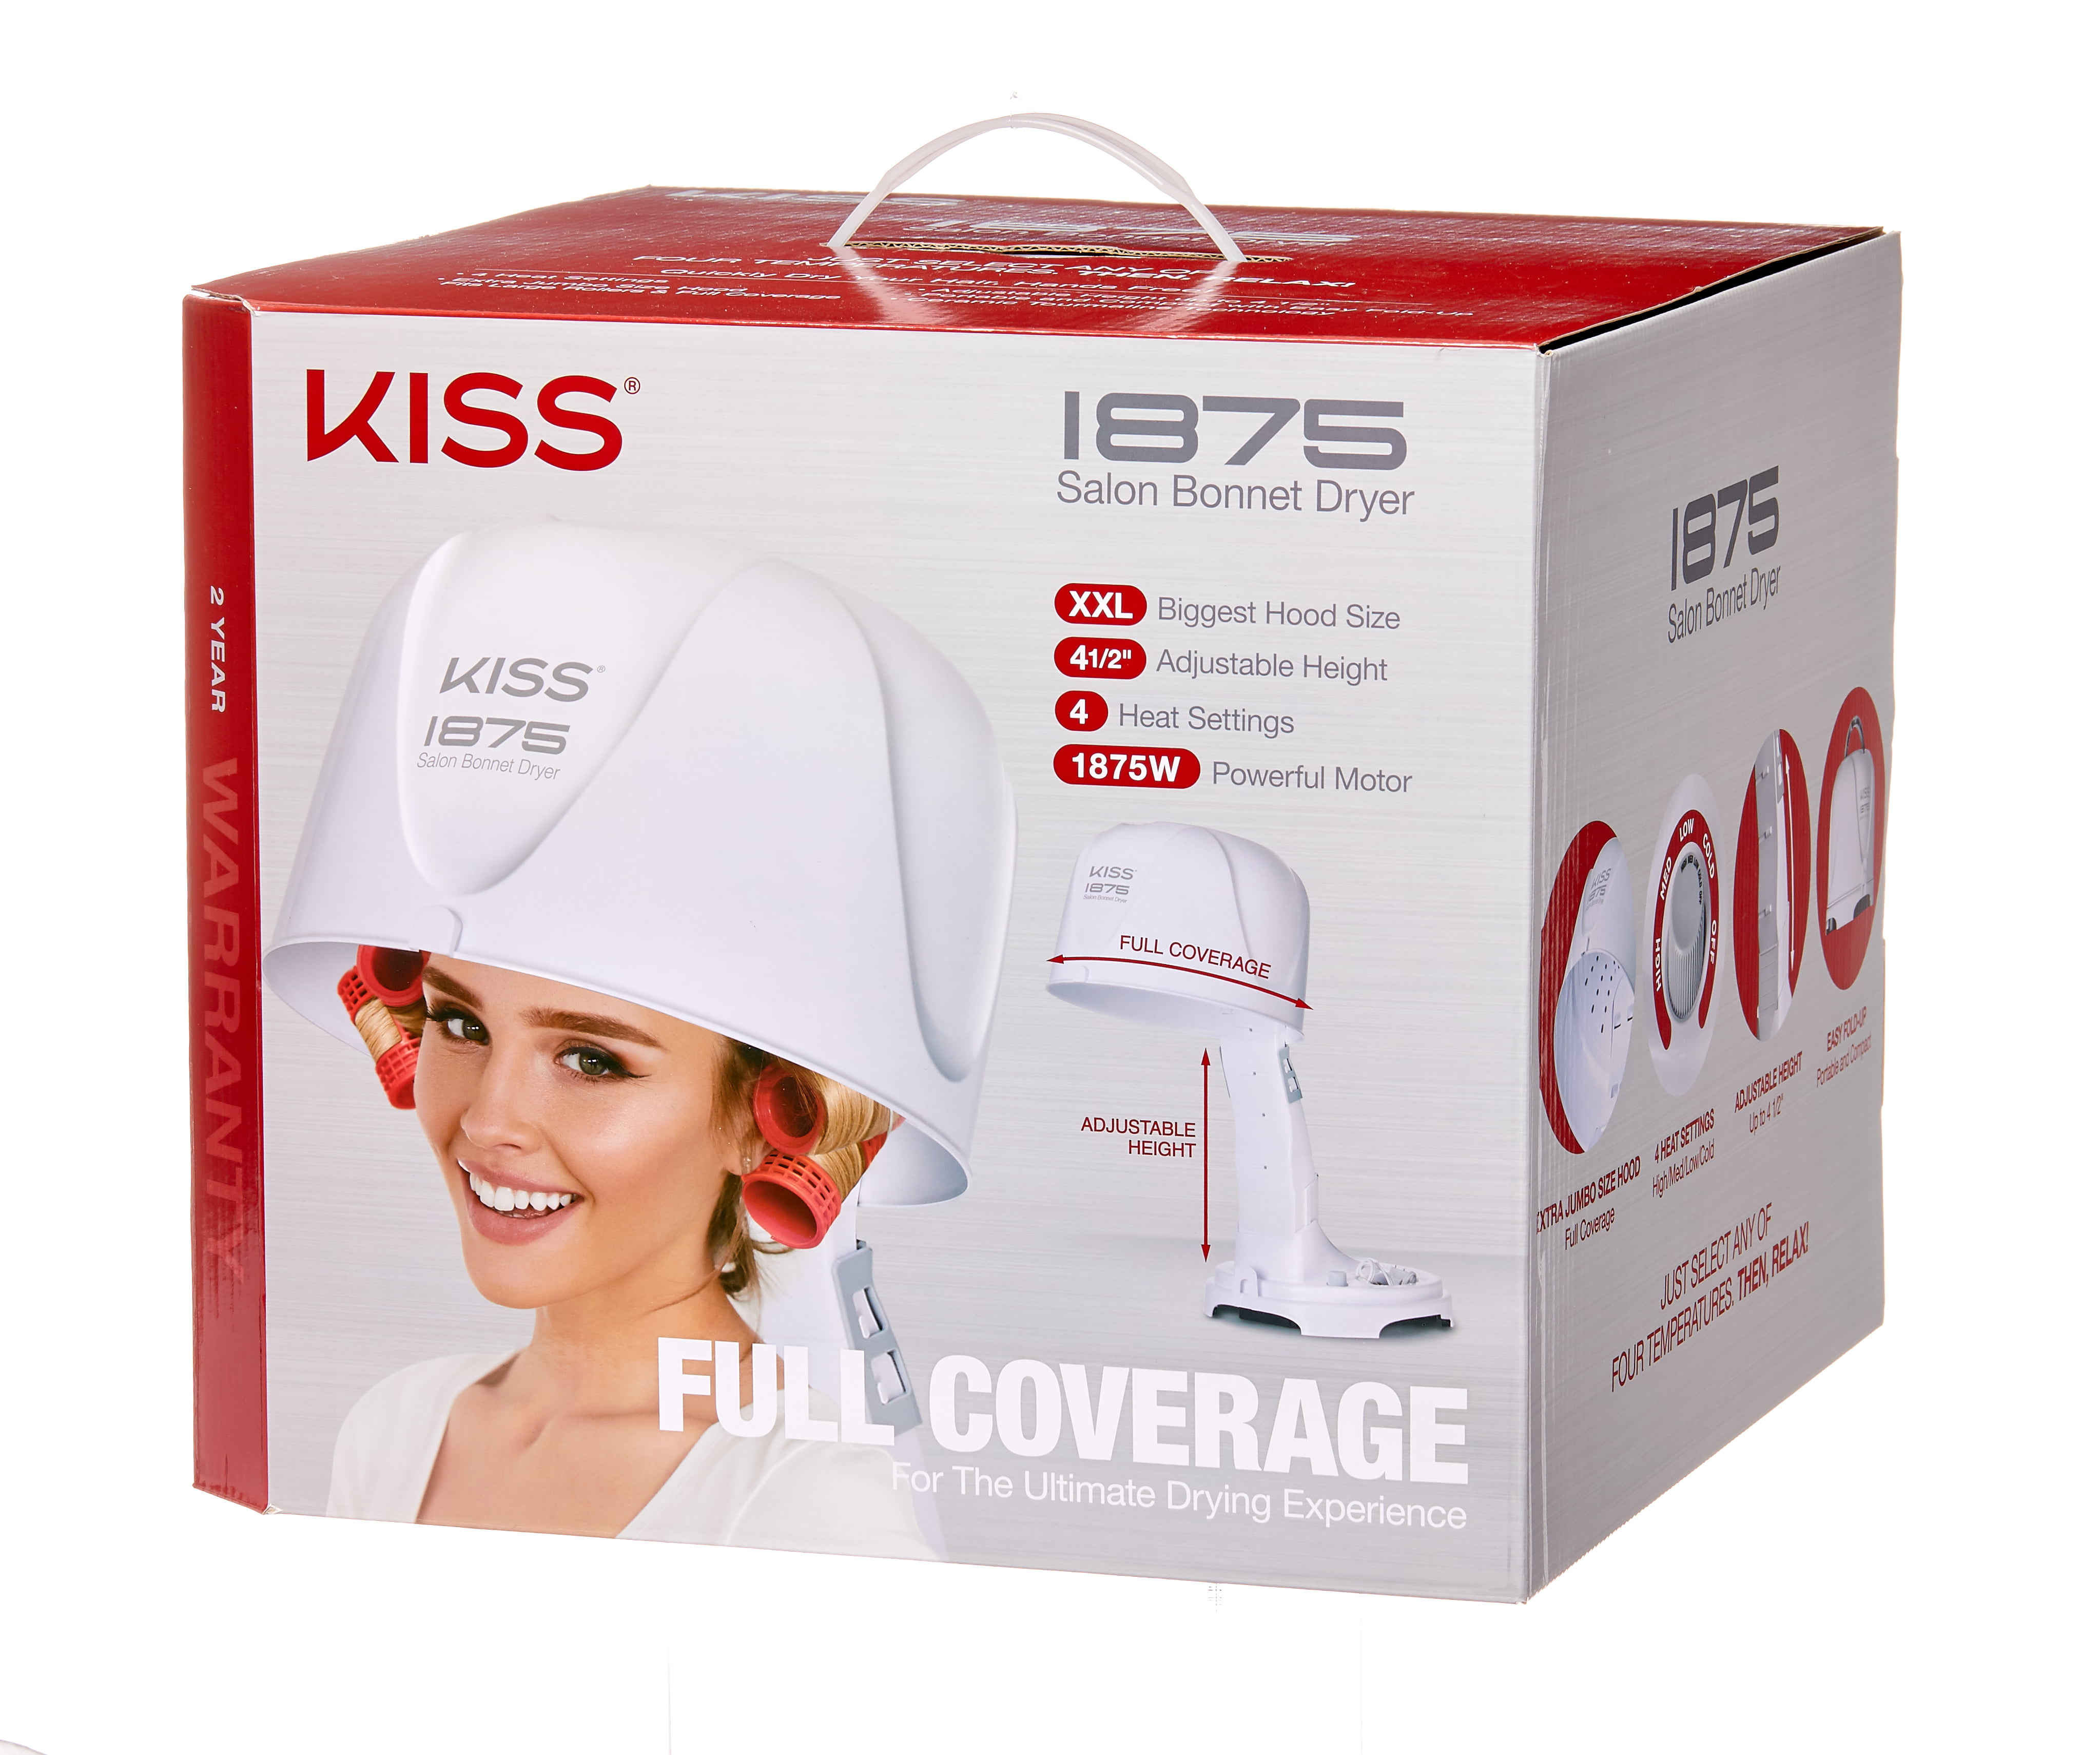 Ionic Bonnet Hair Dryer with Stand - Salon Hair Dryers